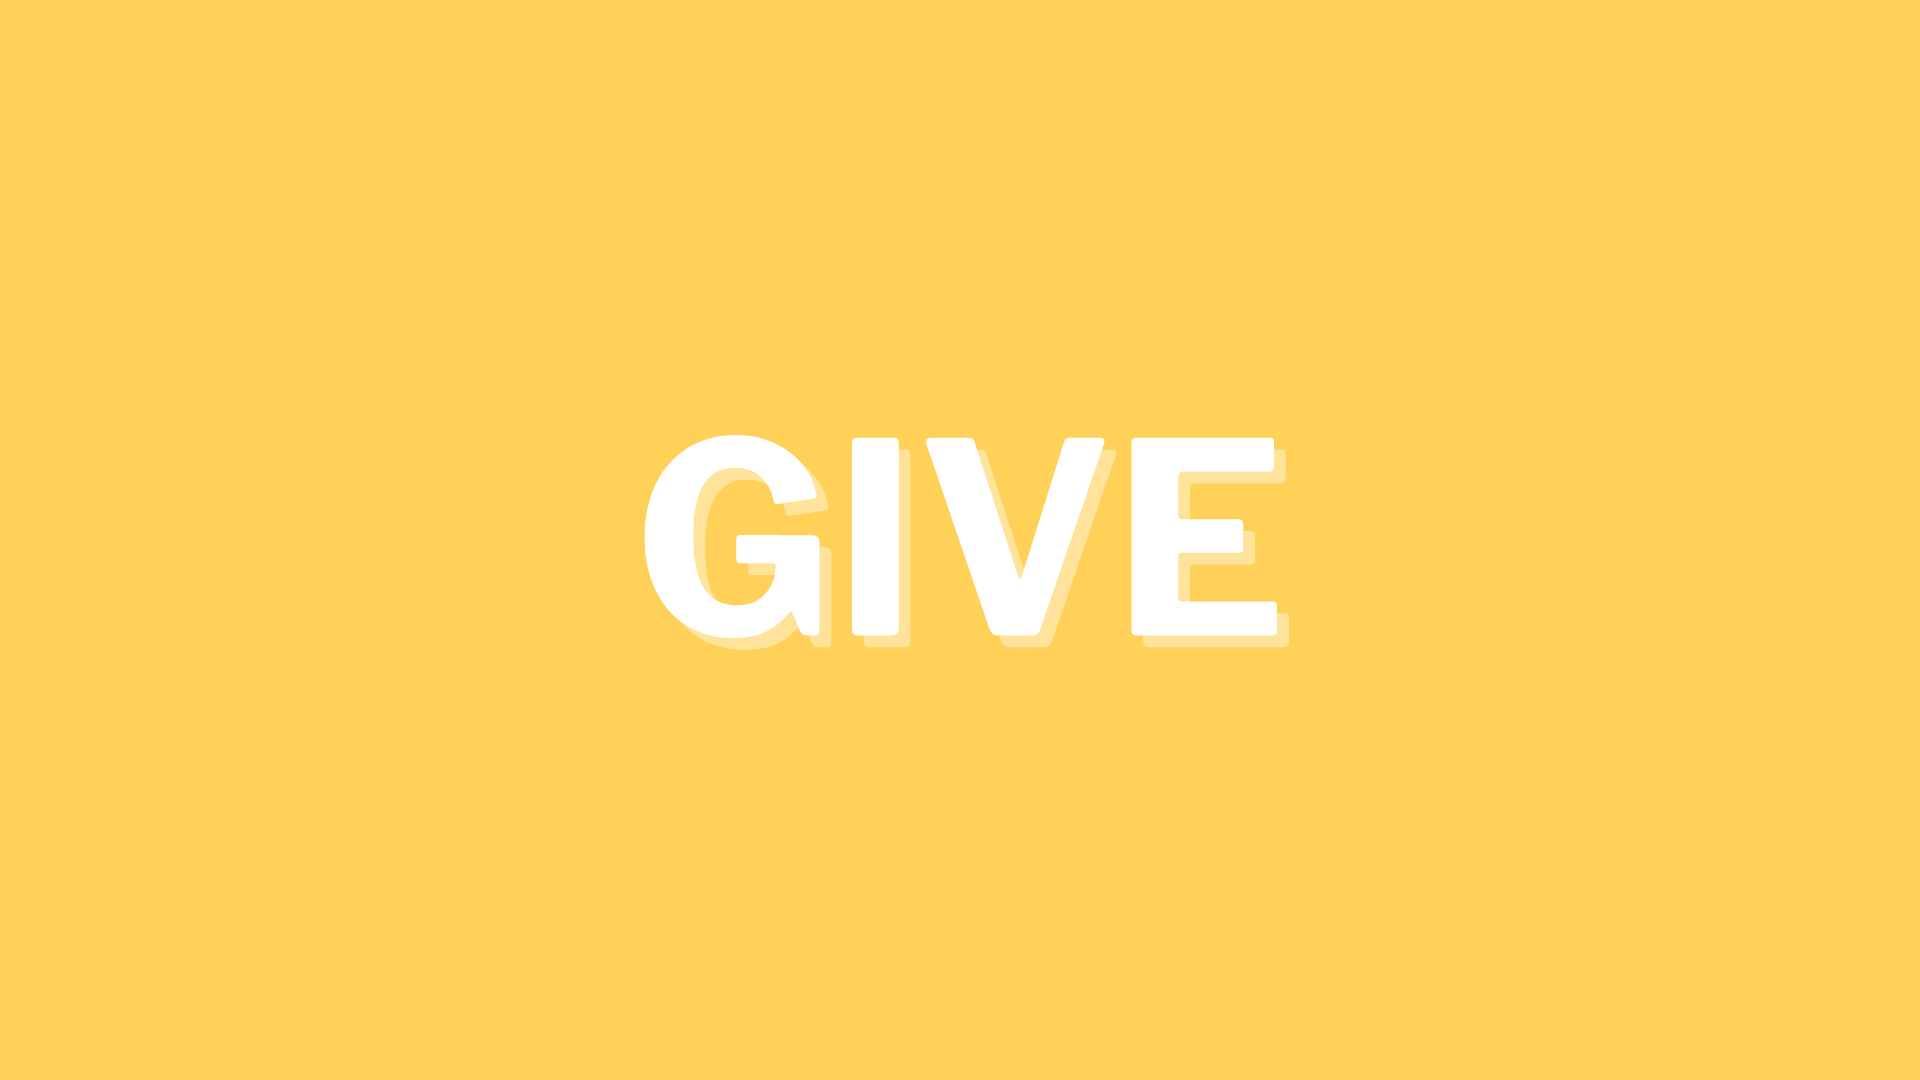 Give (Copy)